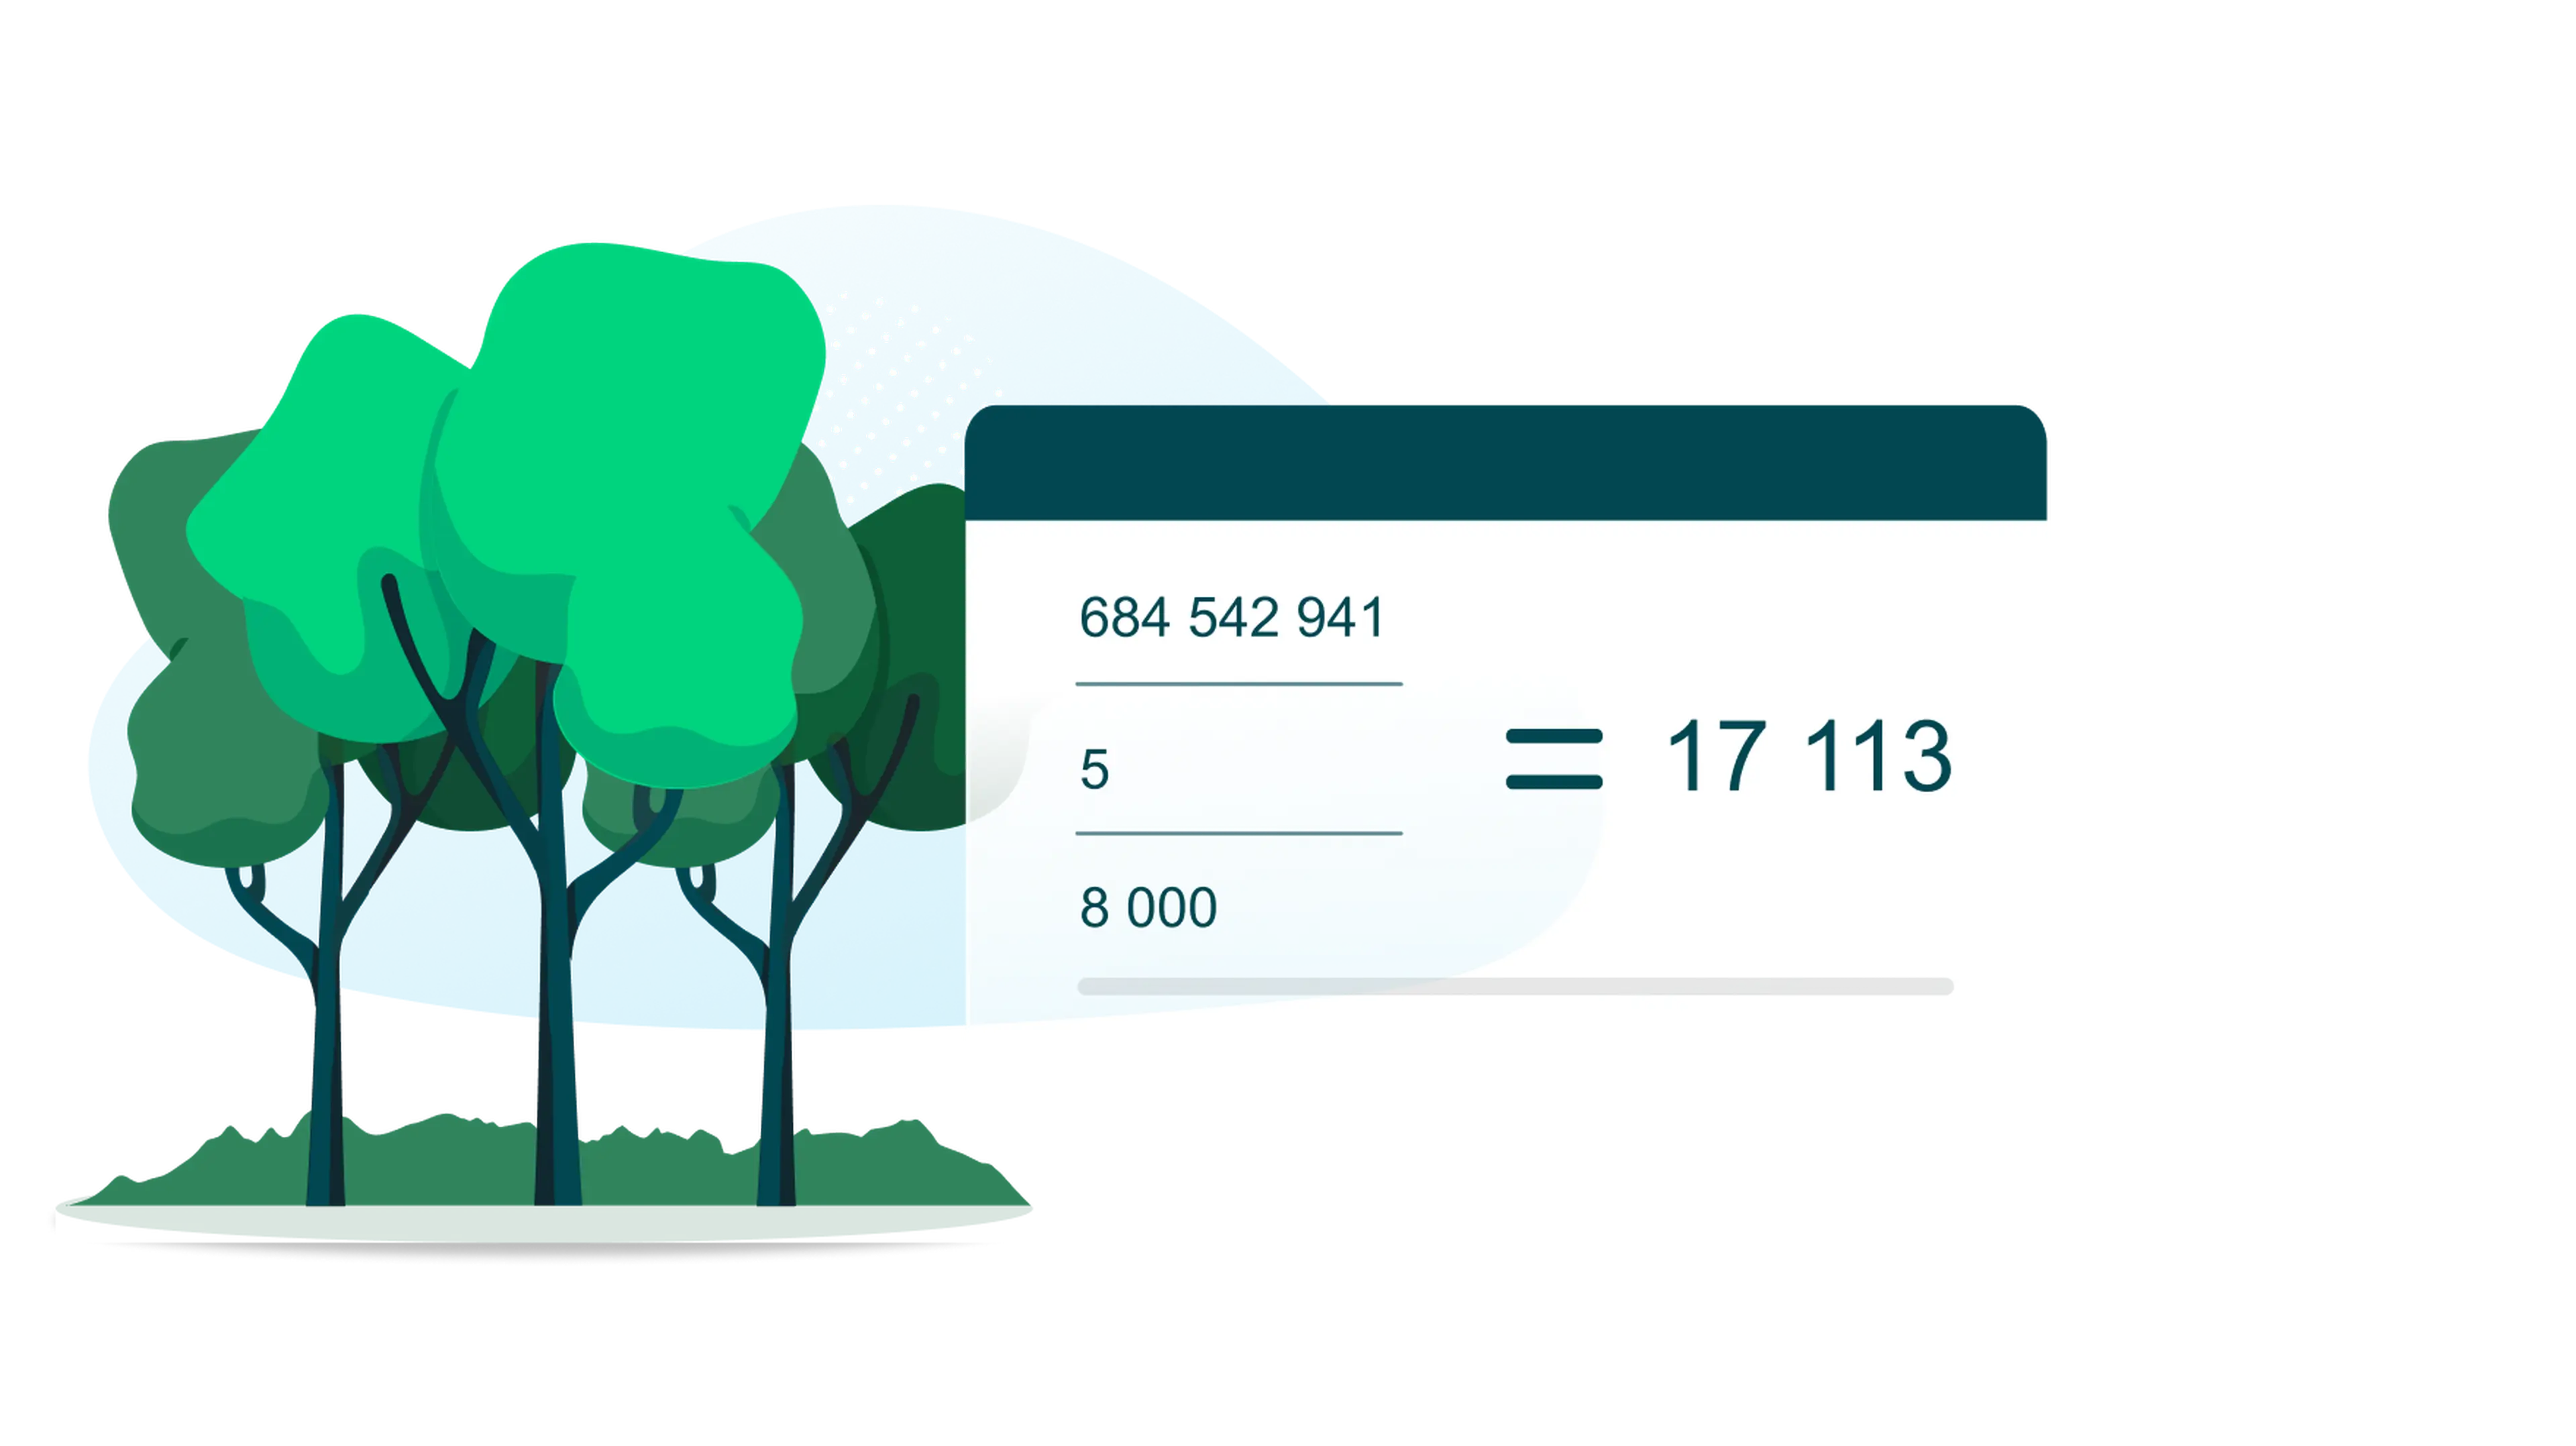 Saved trees calculation